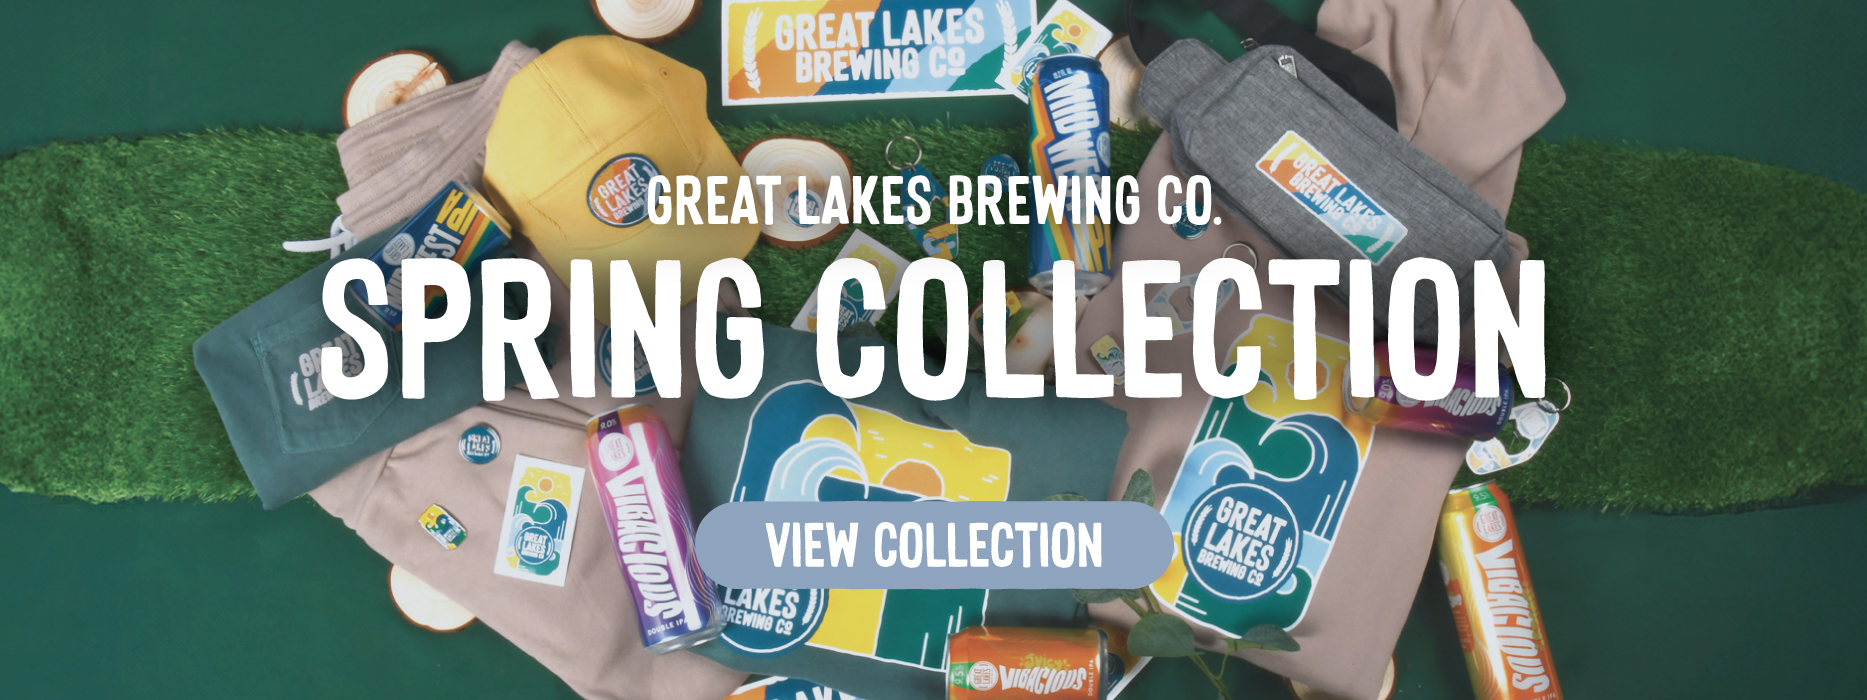 Great Lakes Brewing Company Spring Collection Items